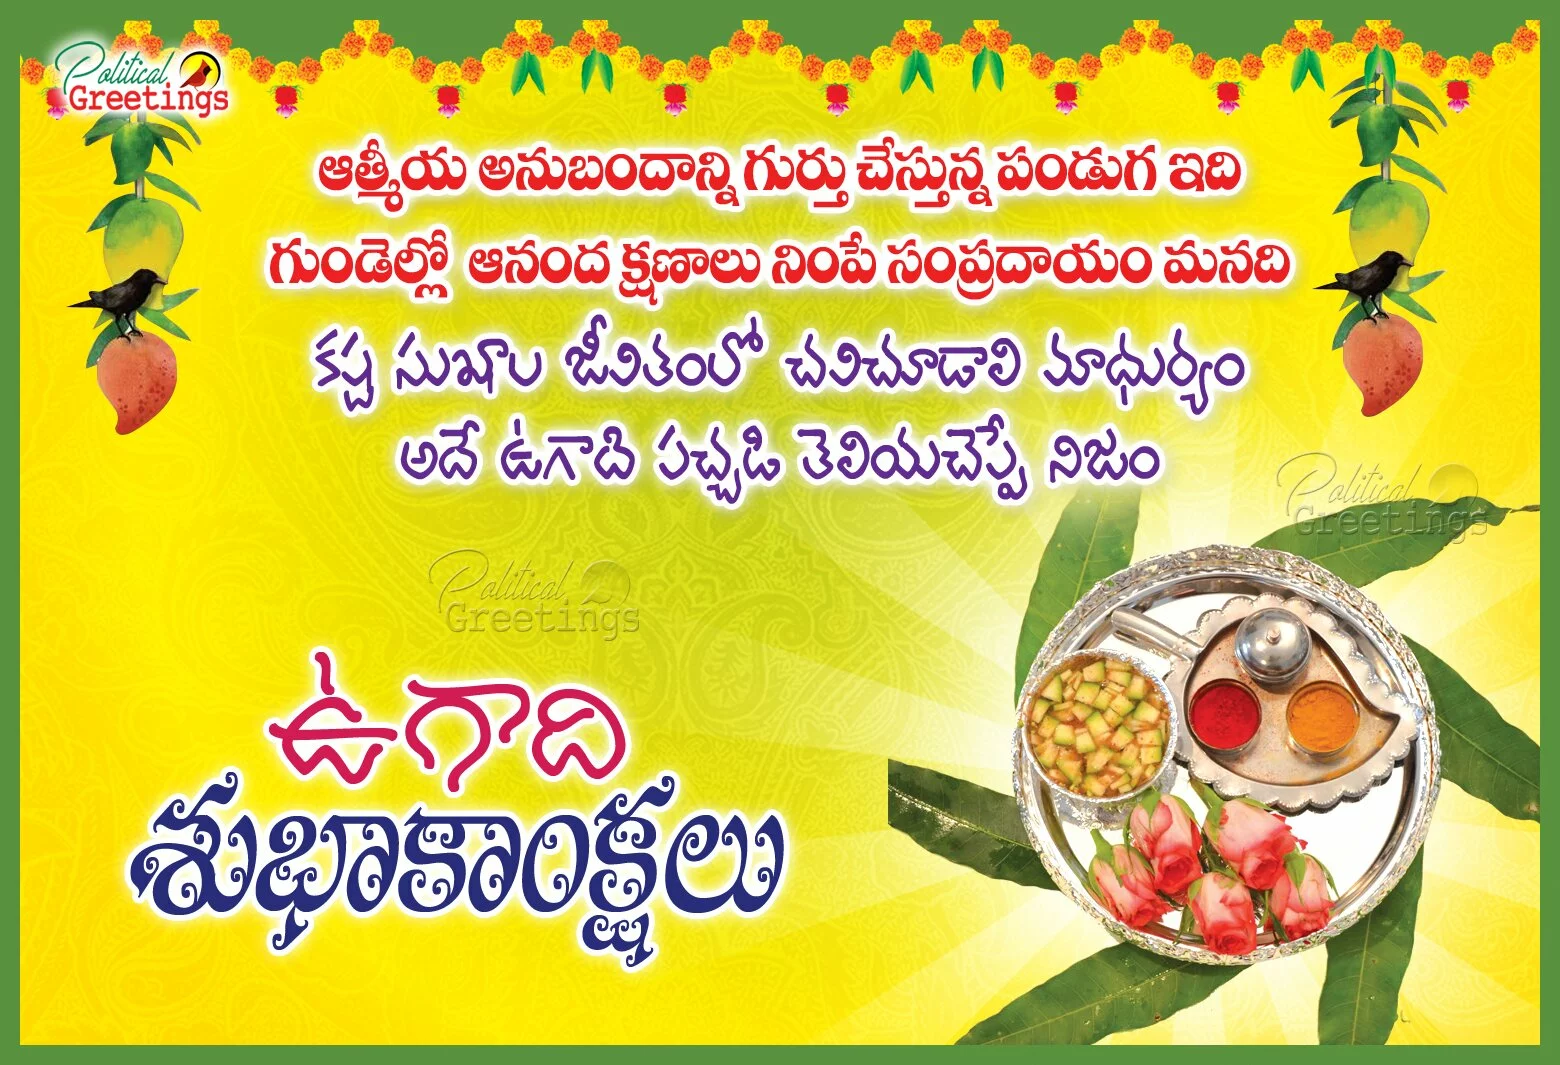 happy-ugadi-2017-telugu-wishes-quotes-greetings-sms-messages-political-greetings4